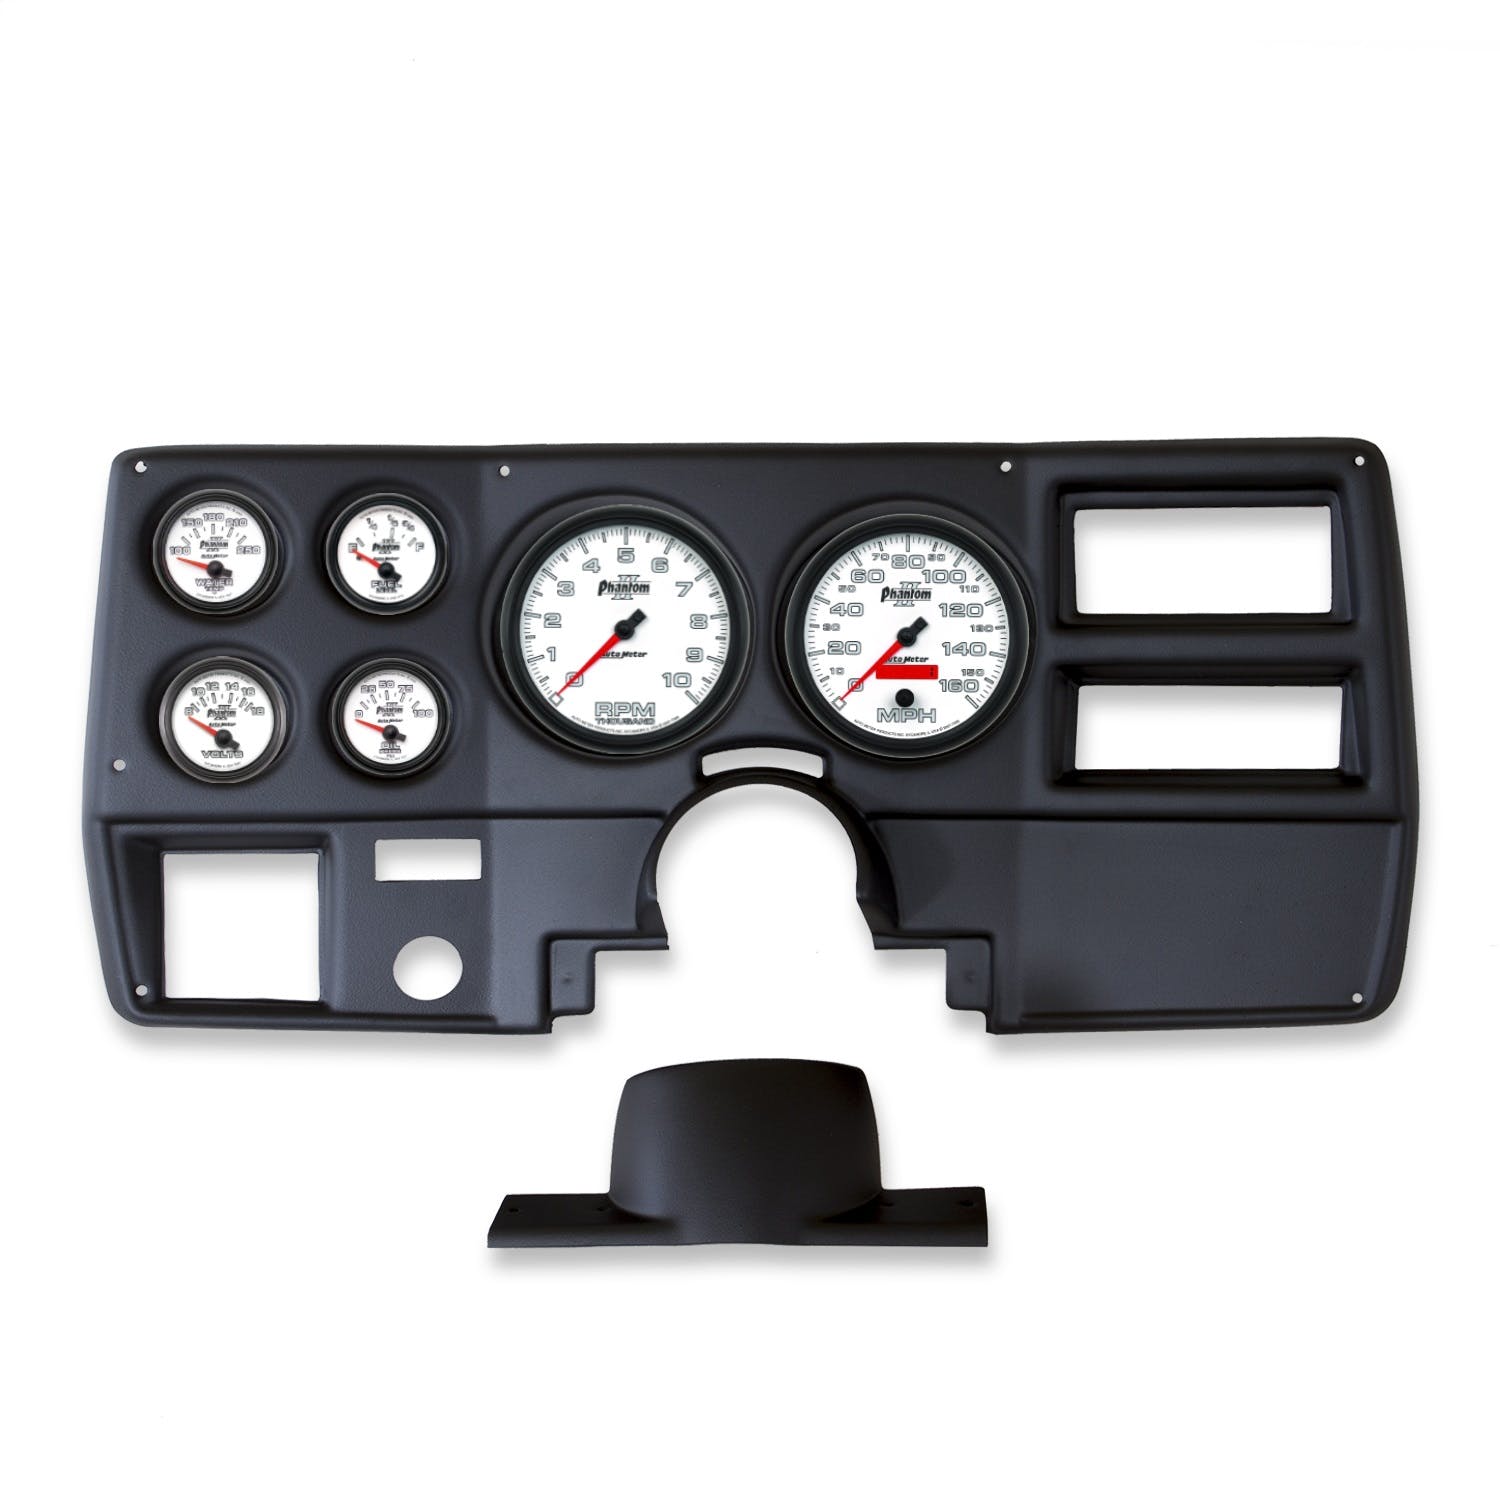 AutoMeter Products 2137-10 6 Gauge Direct-Fit Dash Kit, Chevy Truck / Suburban 73-83, Phantom II